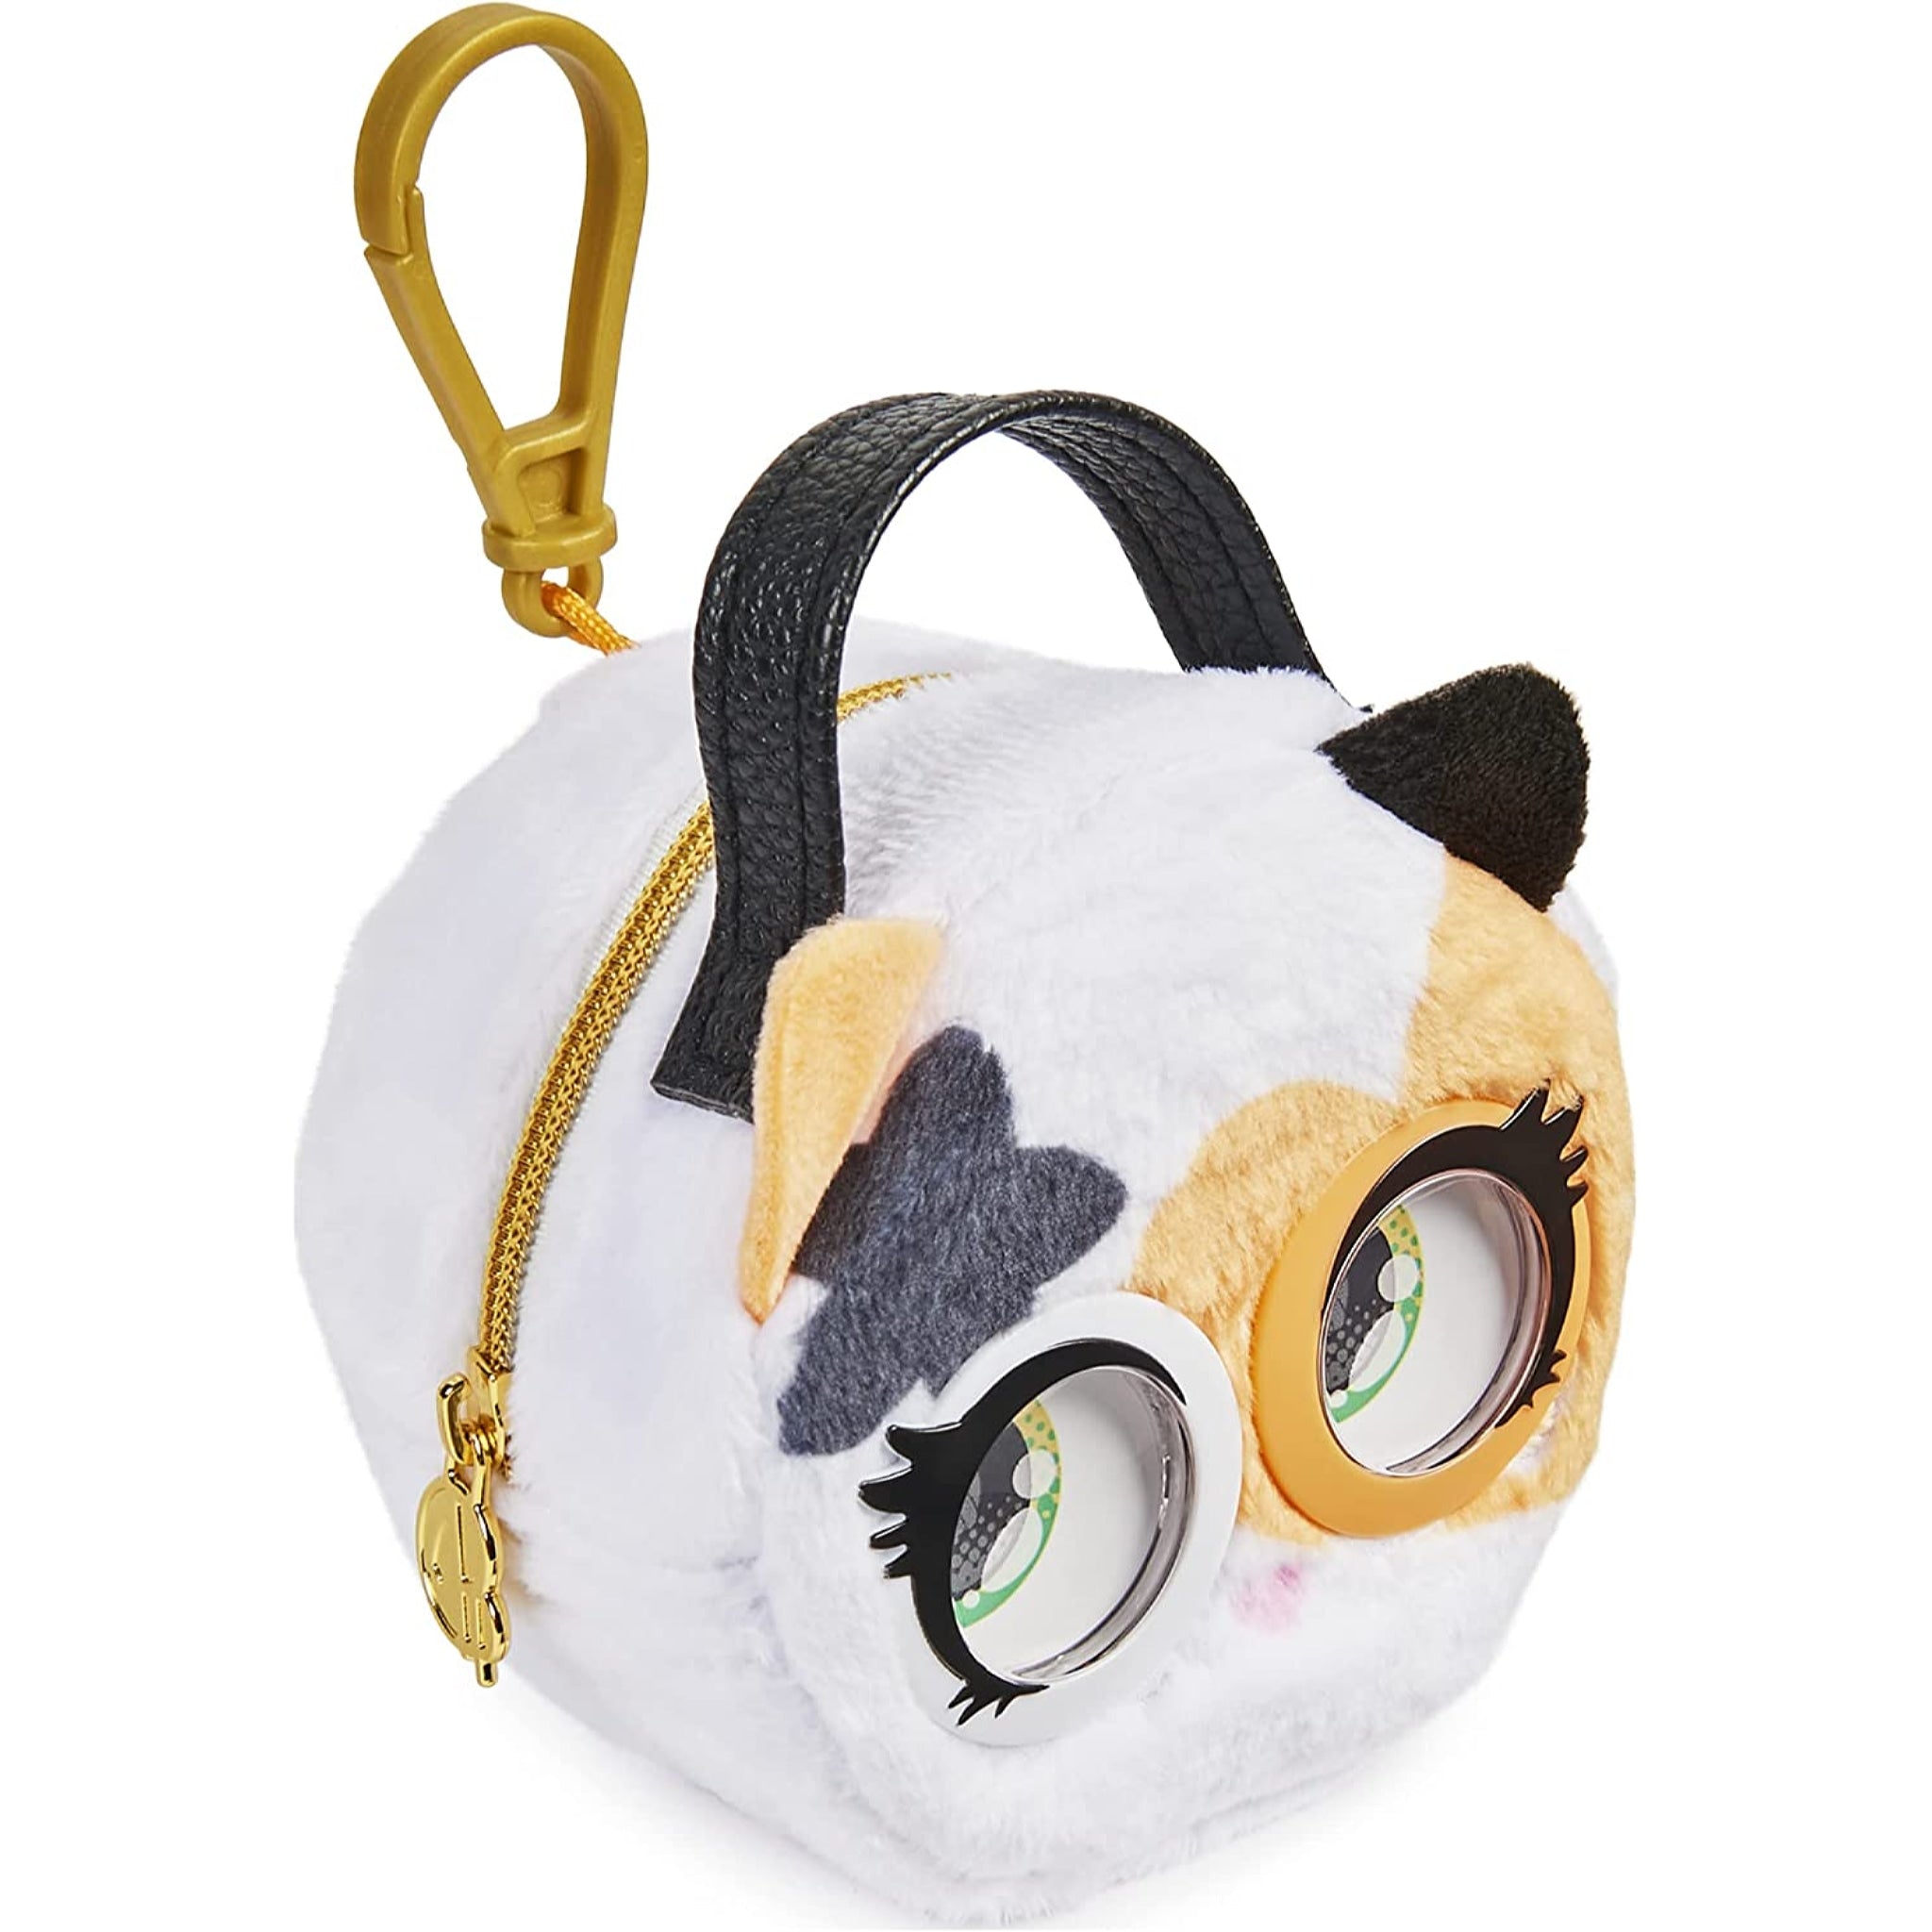 Purse Pets Micro Kitty Small Purse Bag with Eye Roll Feature